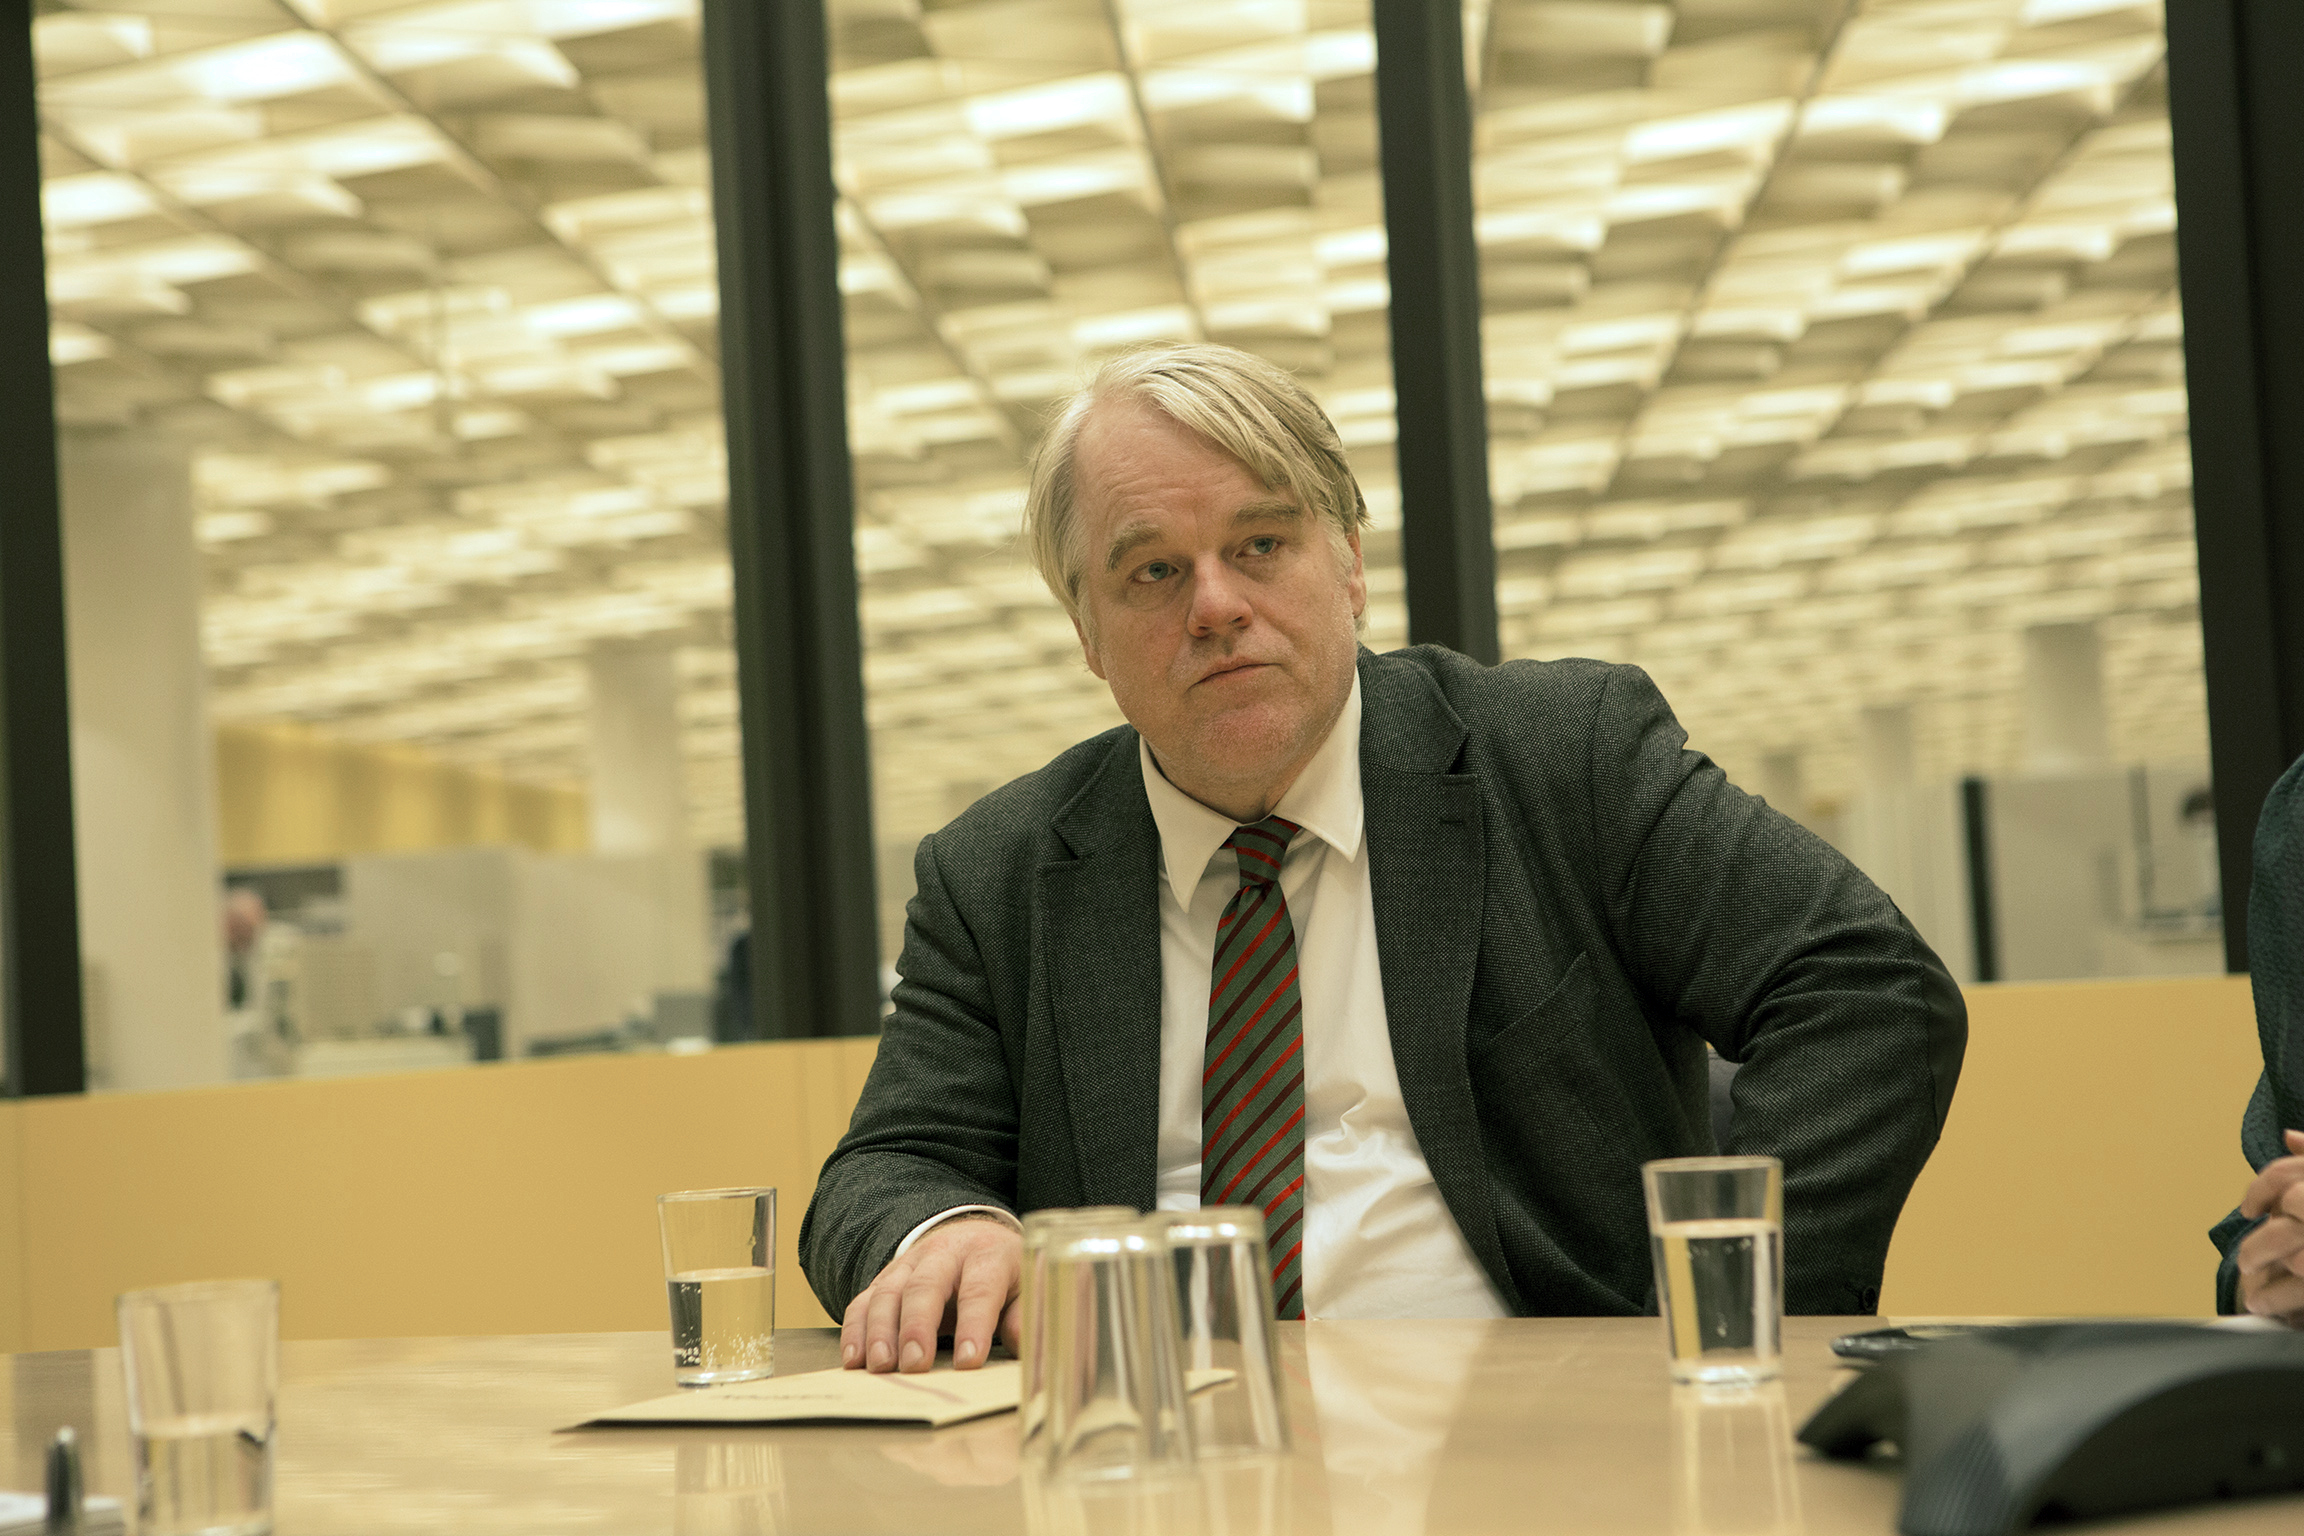 Philip Seymour Hoffman as Günther Bachmann in A Most Wanted Man, 2014.